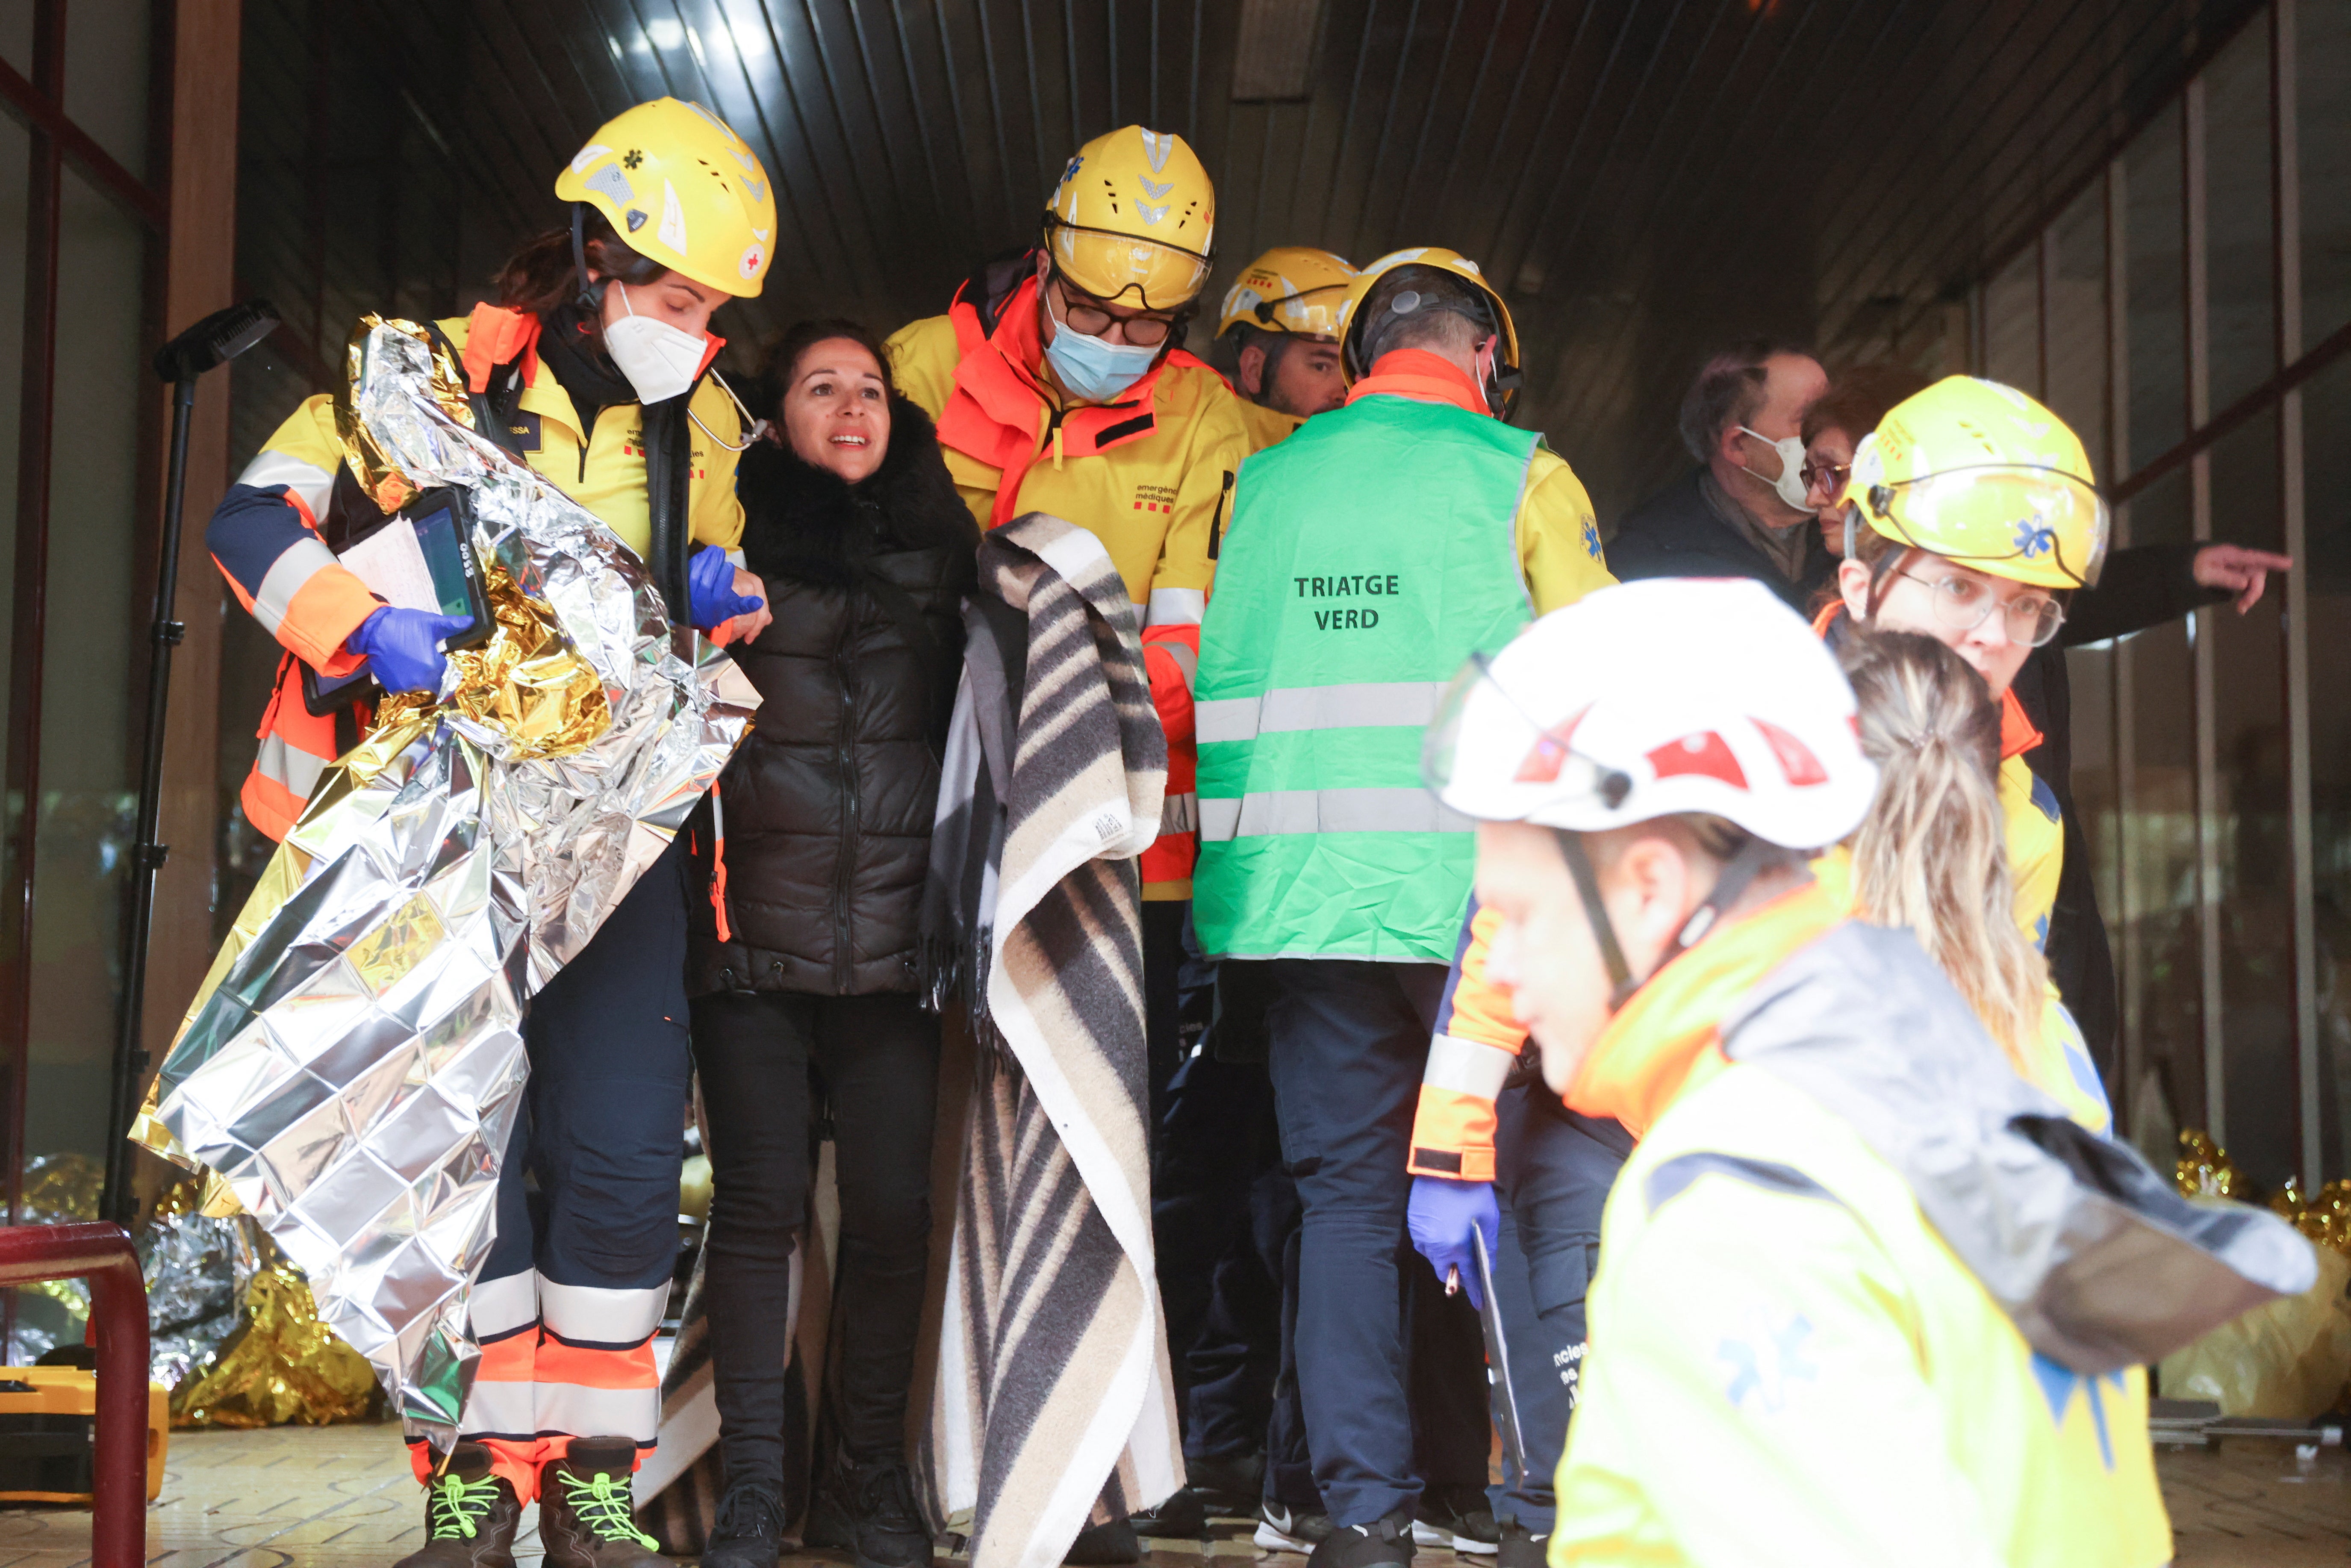 A wounded person is helped by medical emergency after two trains collided in Spain's northeastern Catalonia region